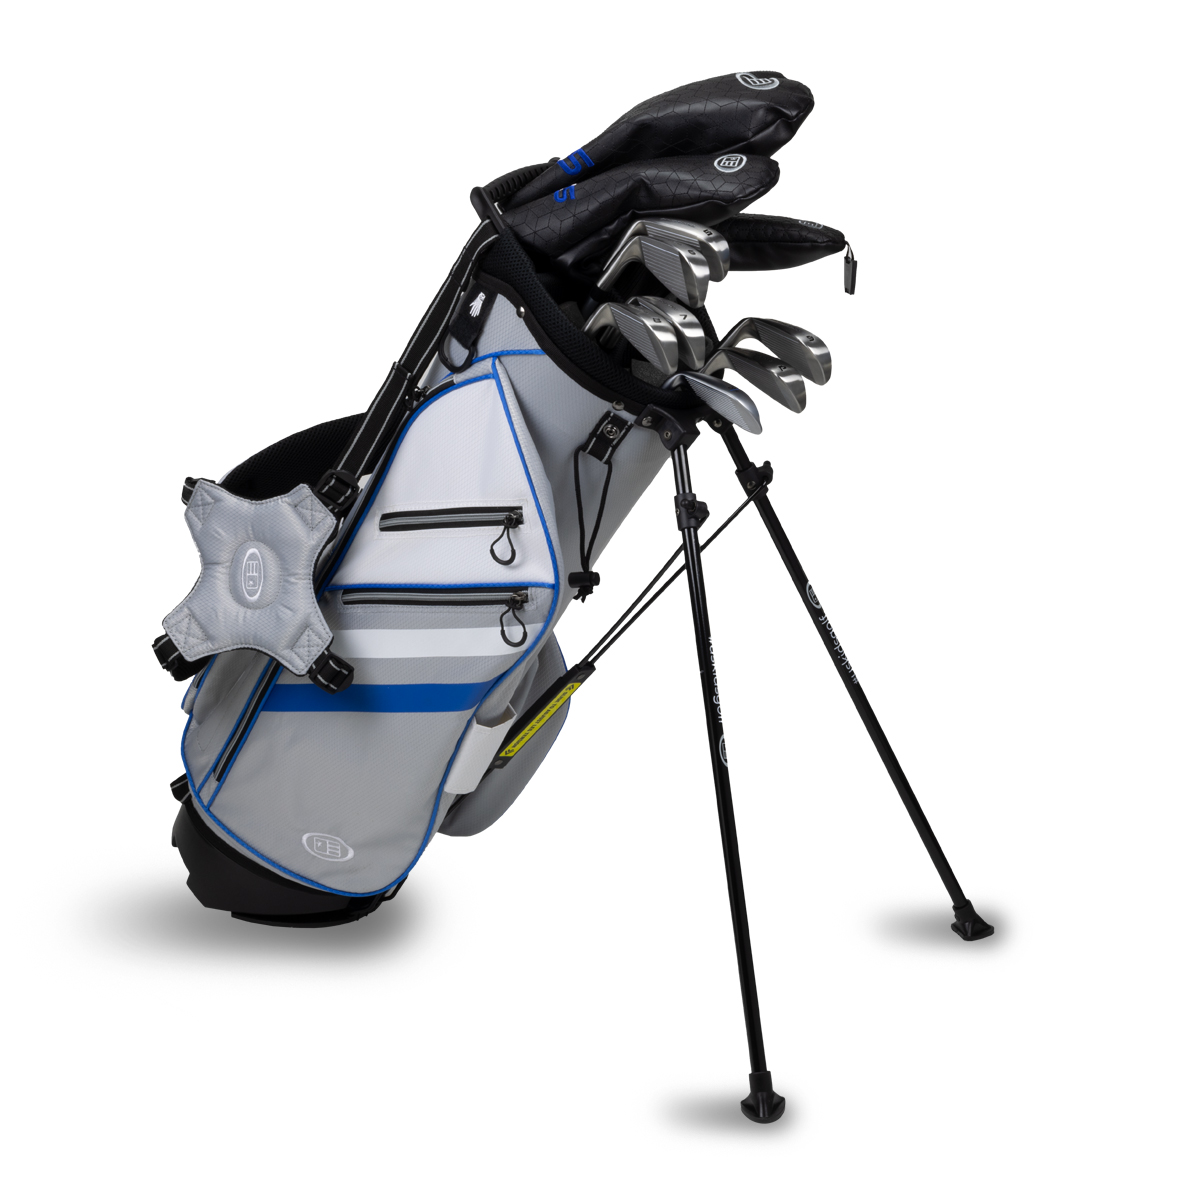 TS5-63  10 Club Stand Set Combo, Silver/White/Blue Bag